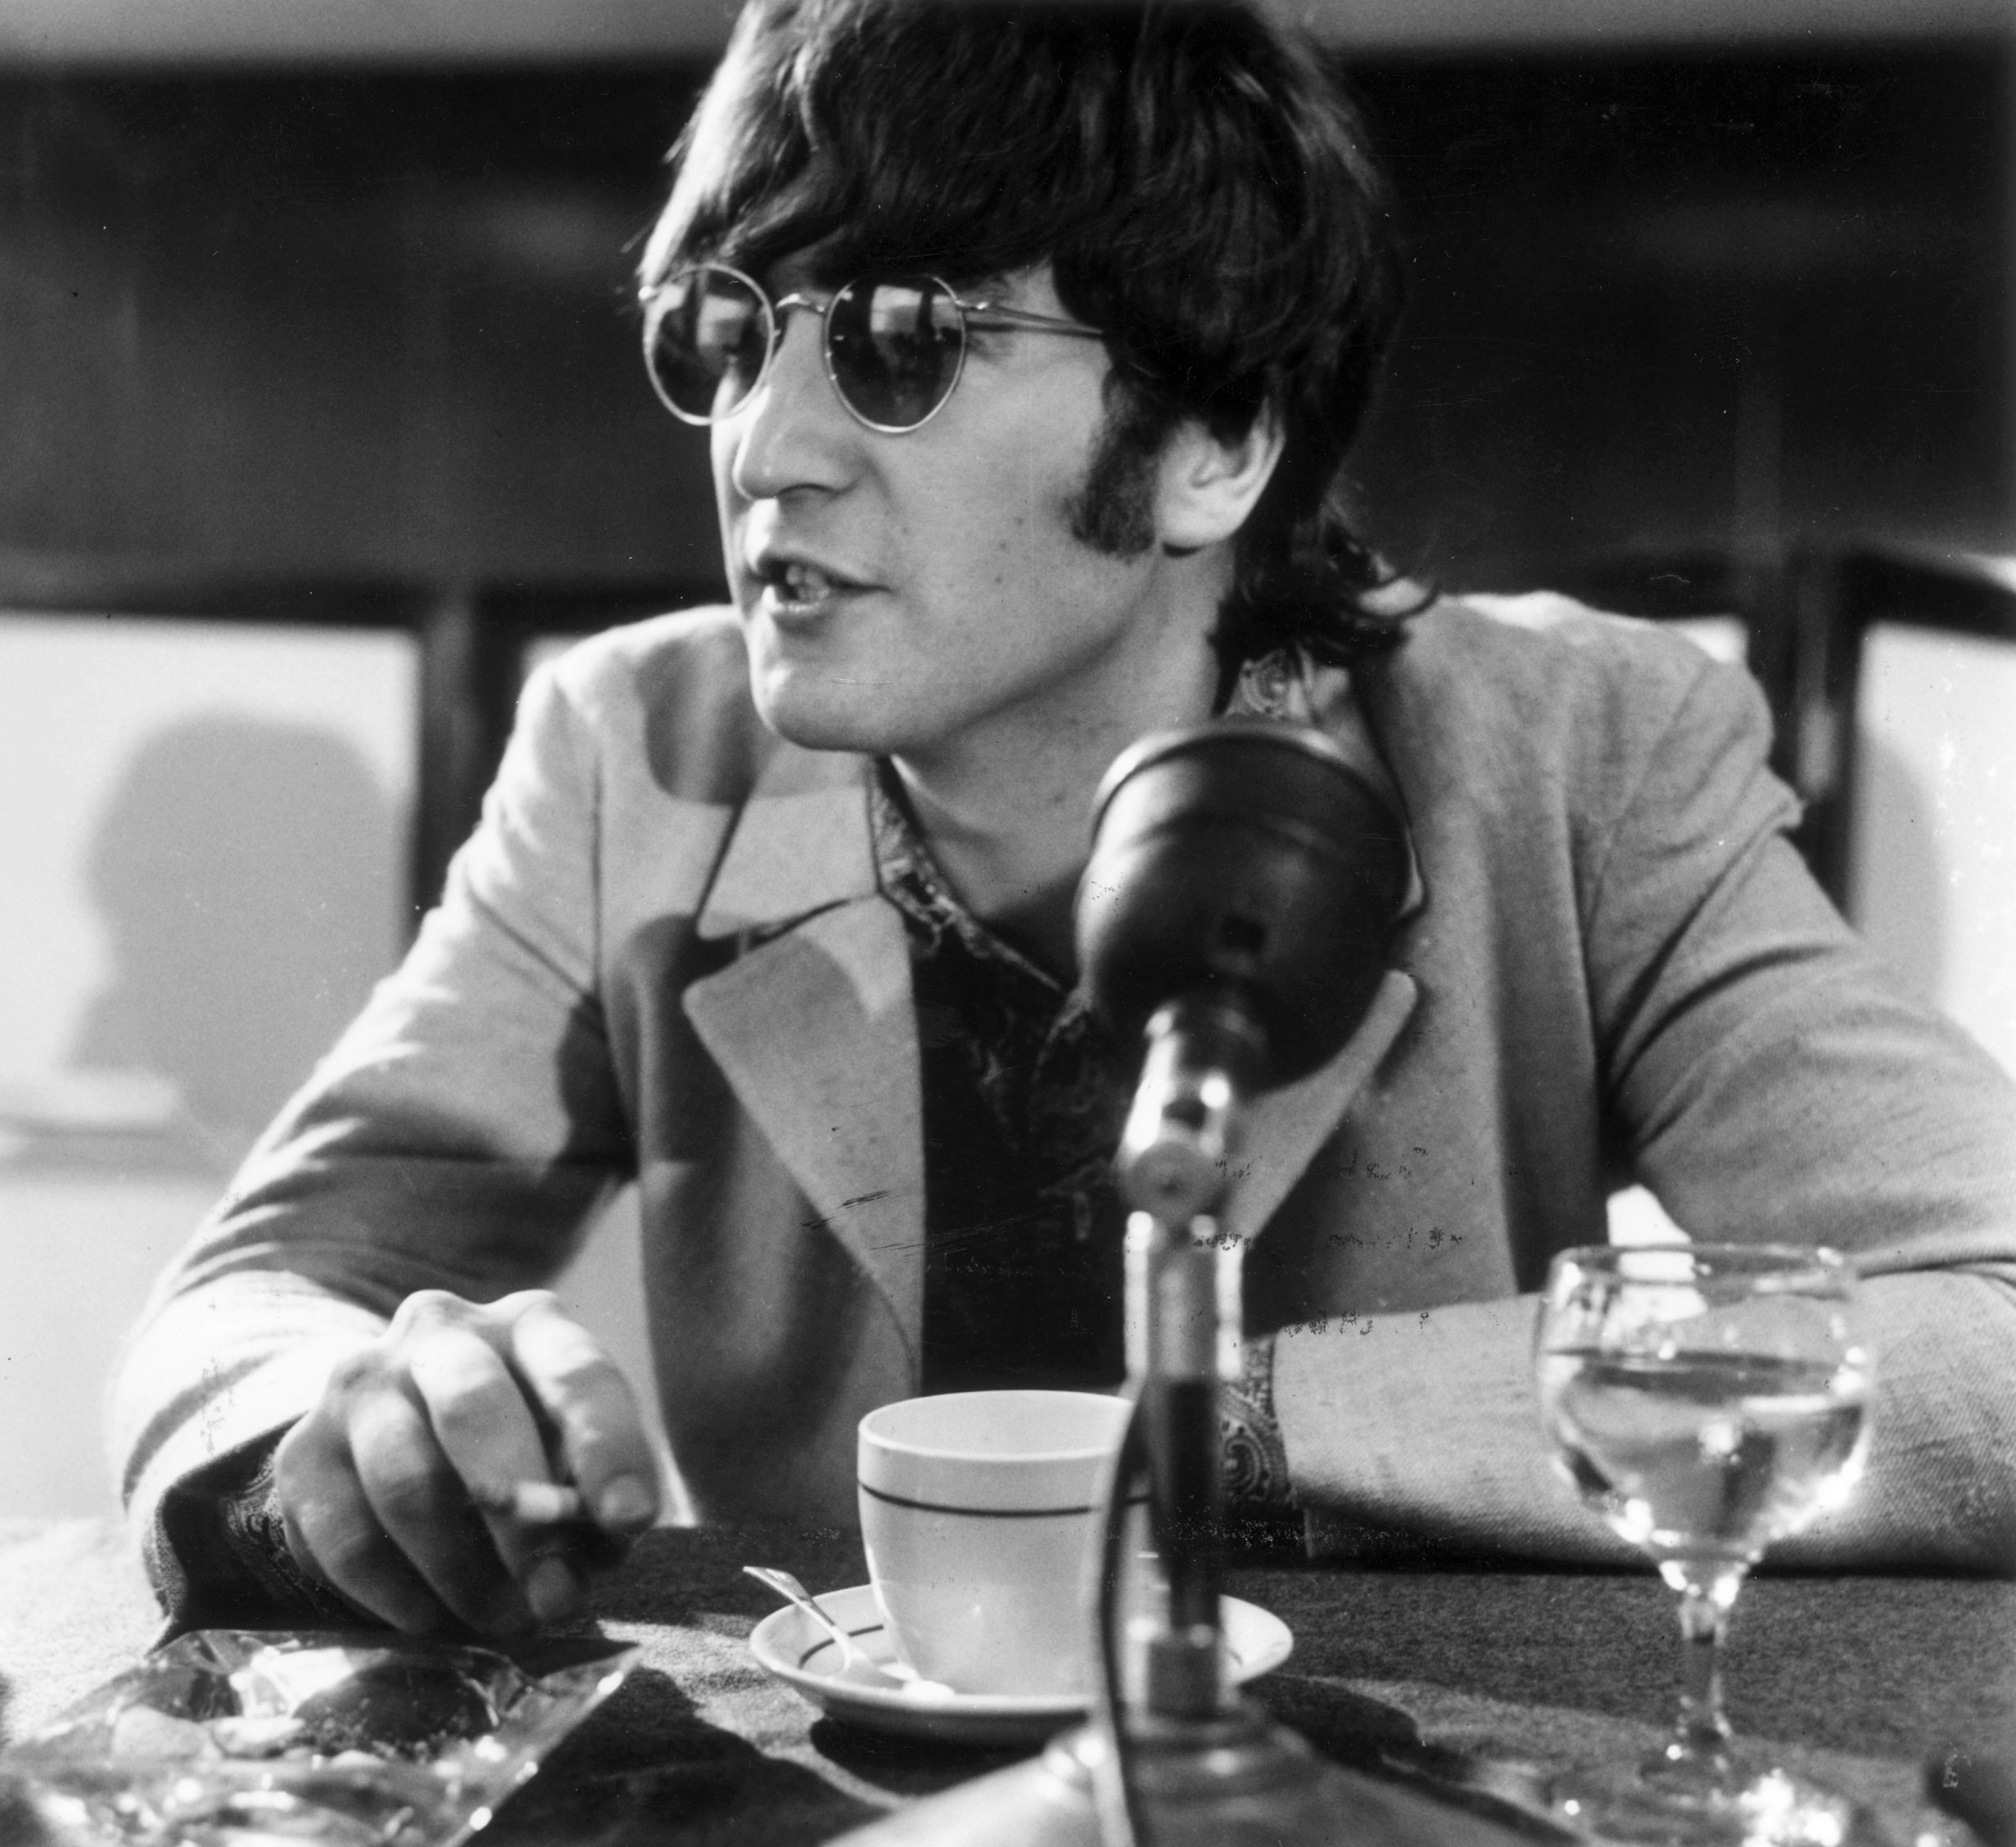 The Beatles' John Lennon with a microphone around the time he made "Imagine"